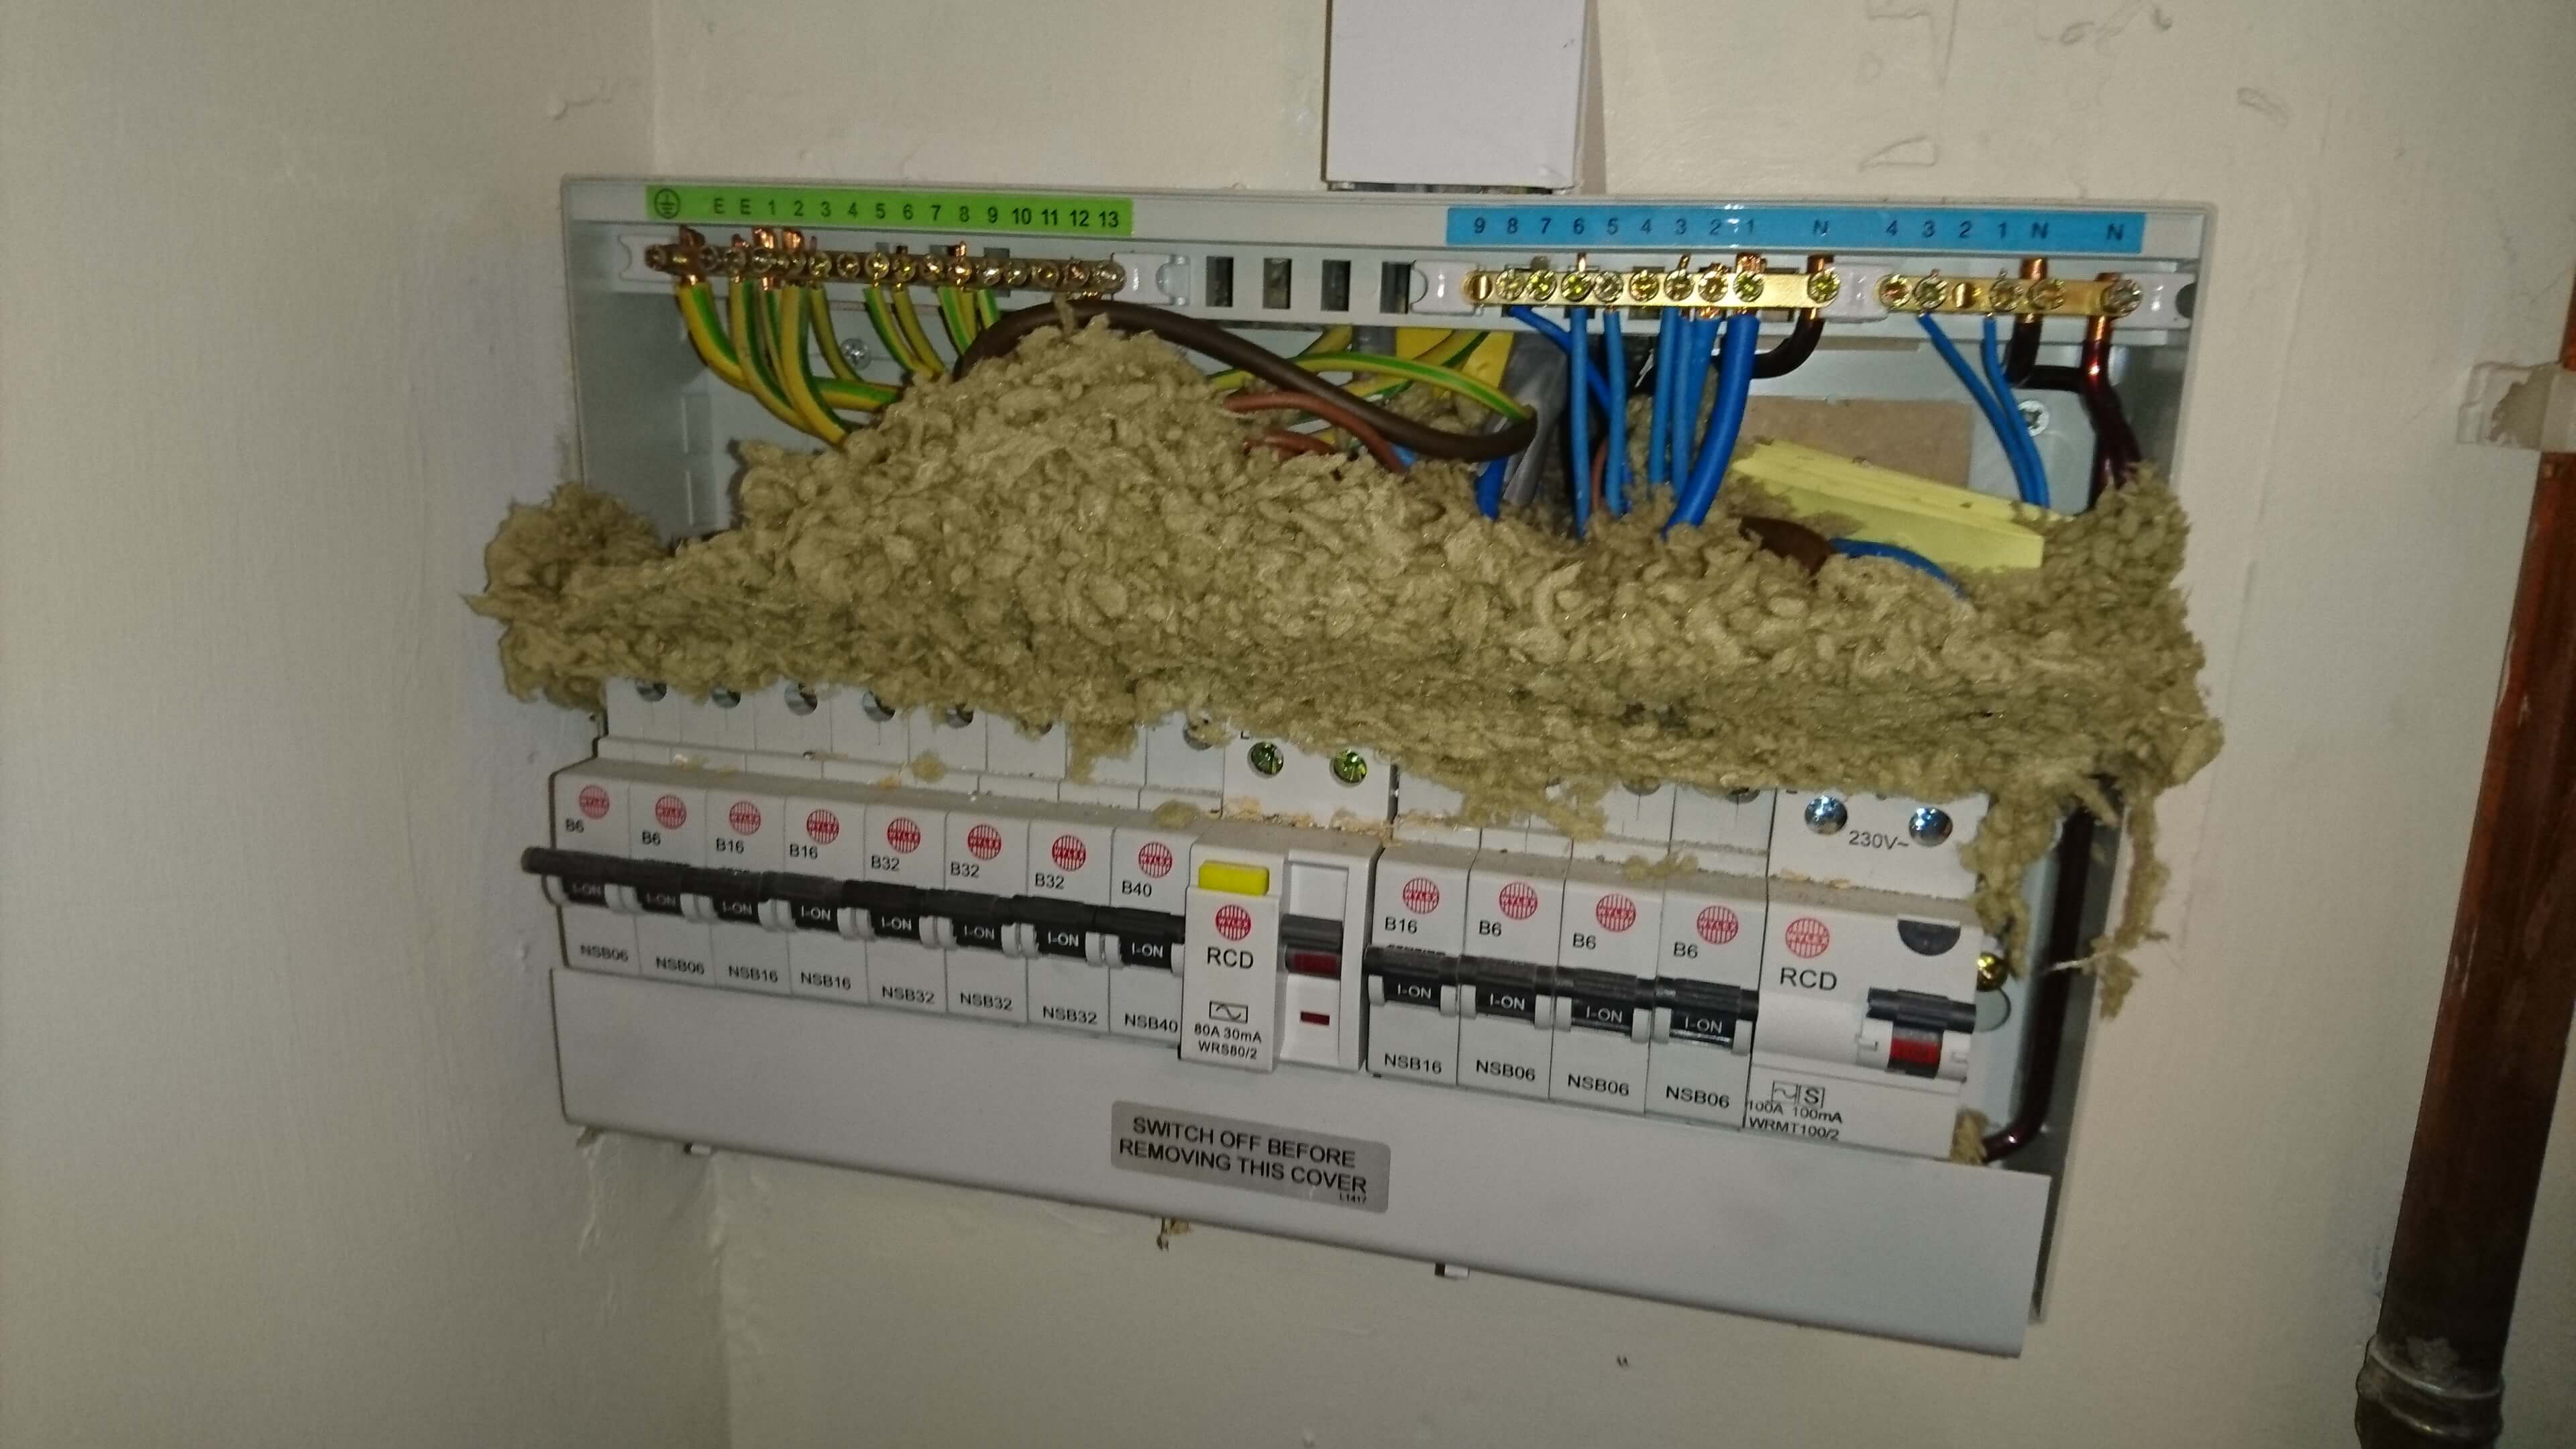 Cavity wall fill damaging electric meters in home